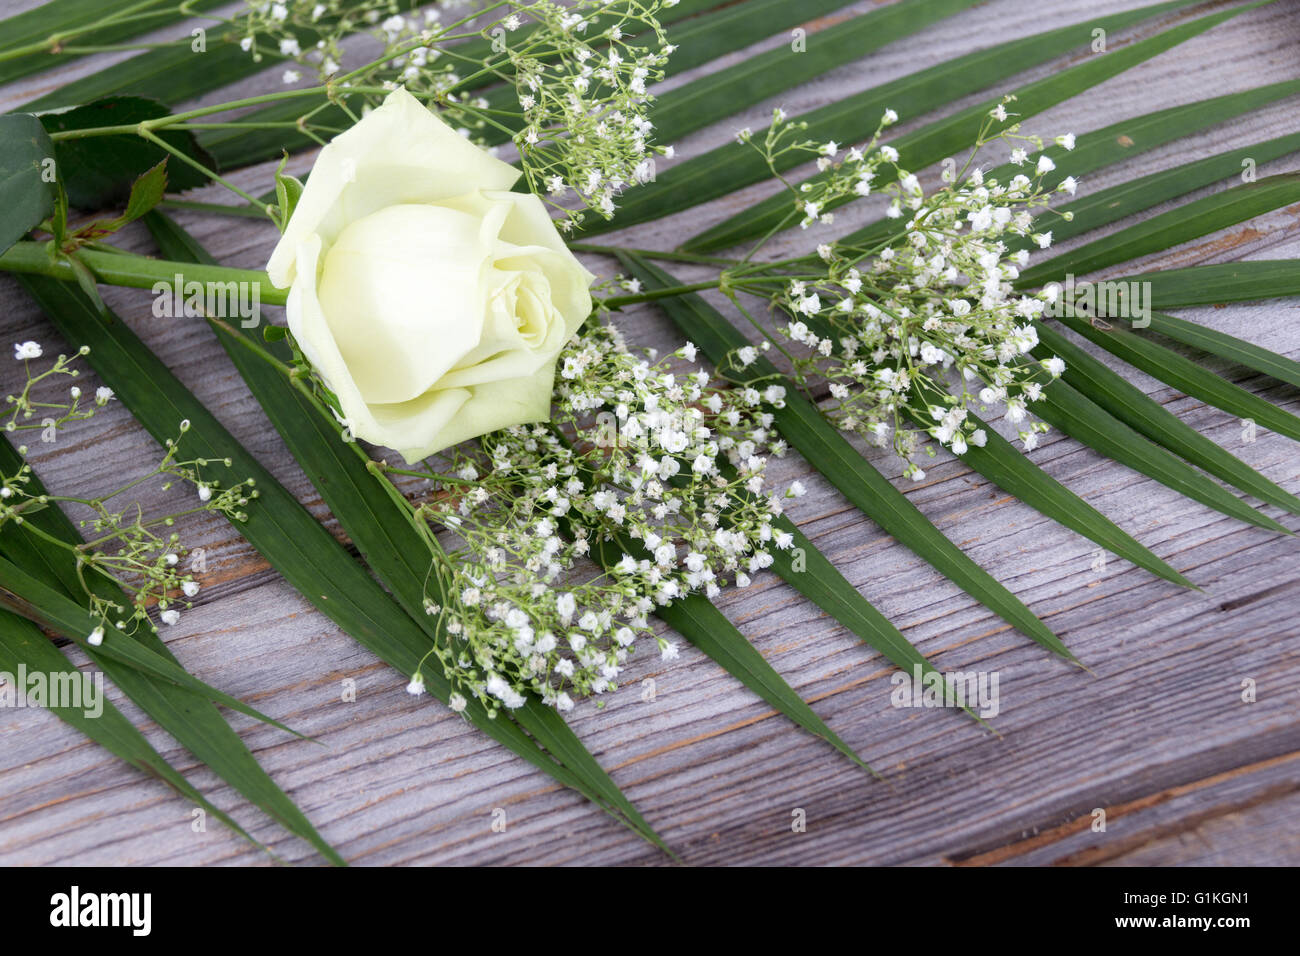 white rose flower on rustic wood table Stock Photo